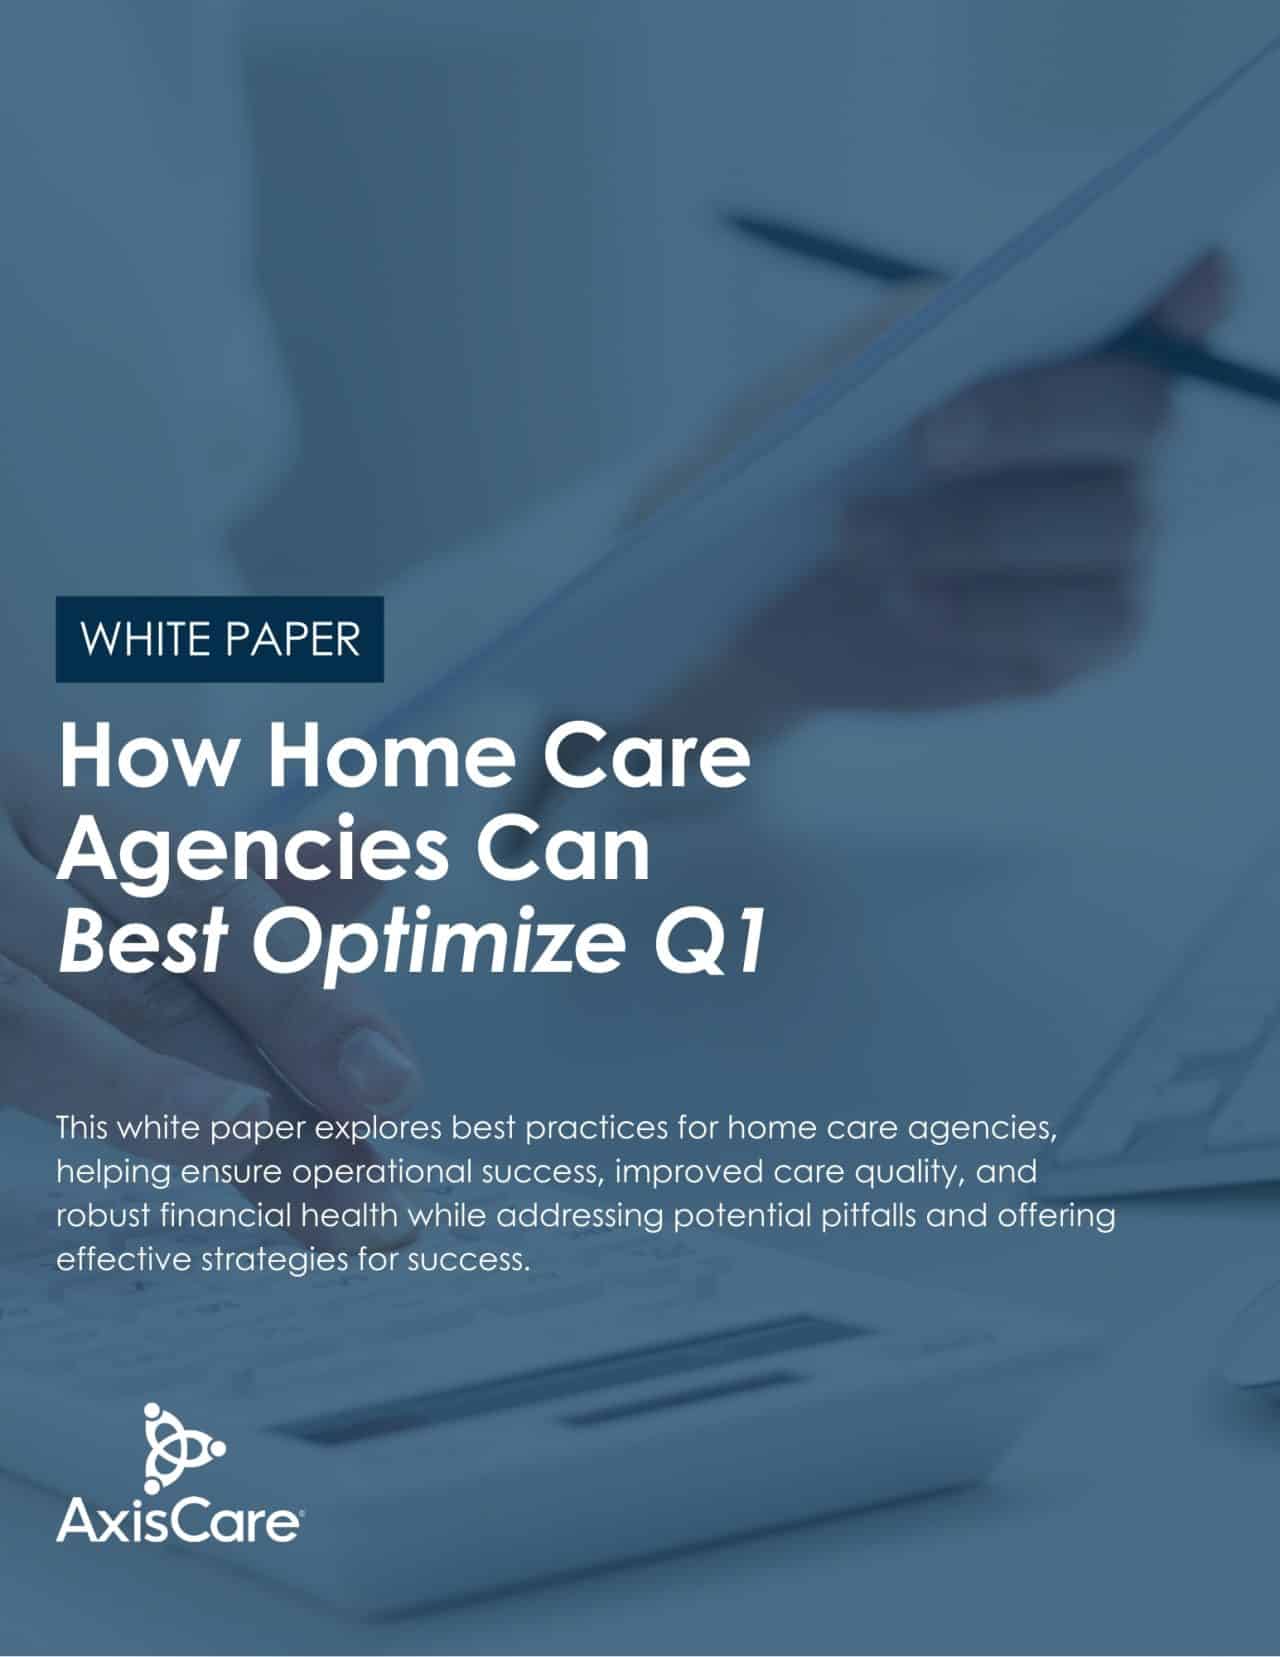 White Paper: How Home Care Agencies Can Best Optimize Q1